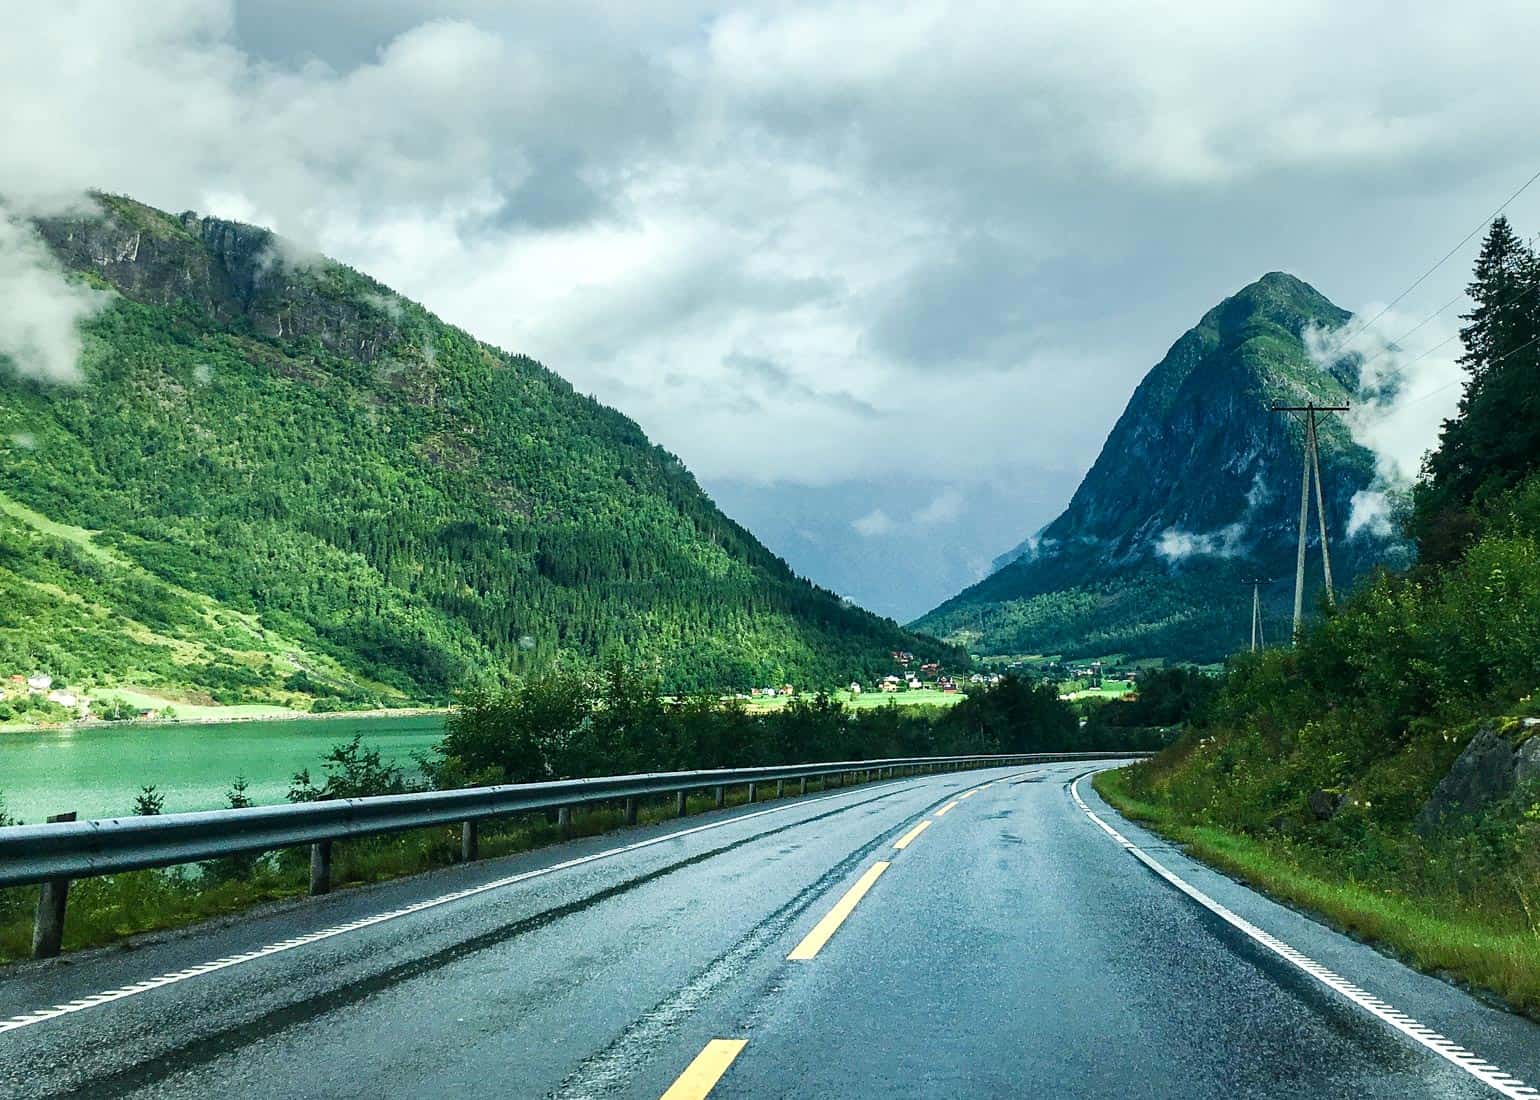 road trip to norway from uk